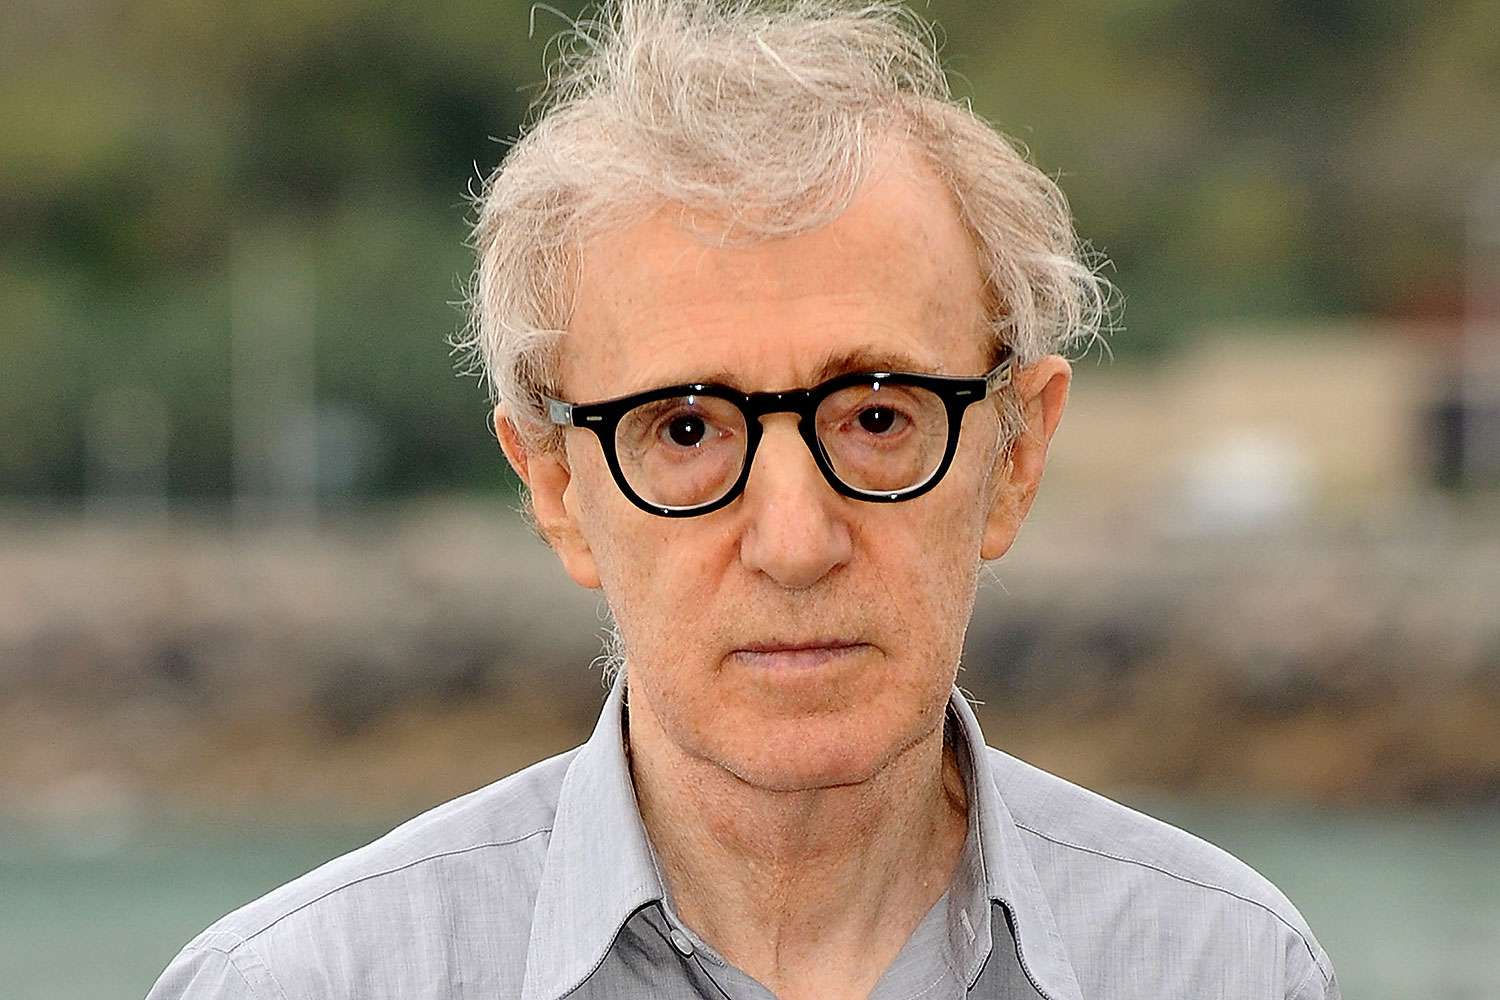 Woody Allen Net Worth - Wealth Of One Of The Richest Directors